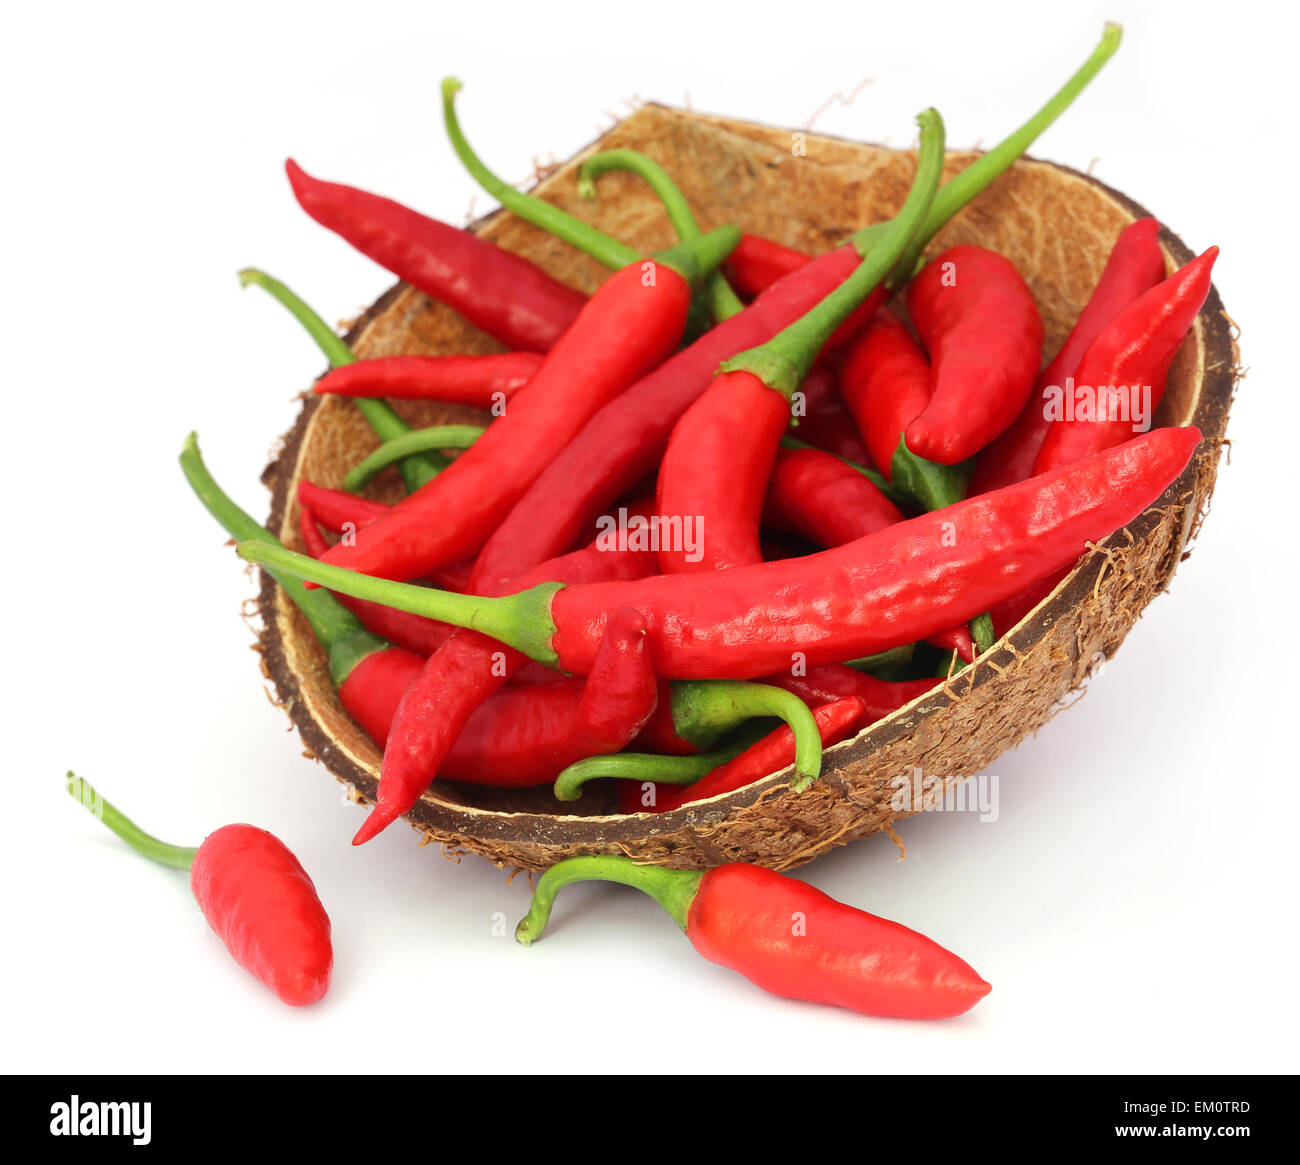 Red chili peppers in a coconut shell over white background Stock Photo